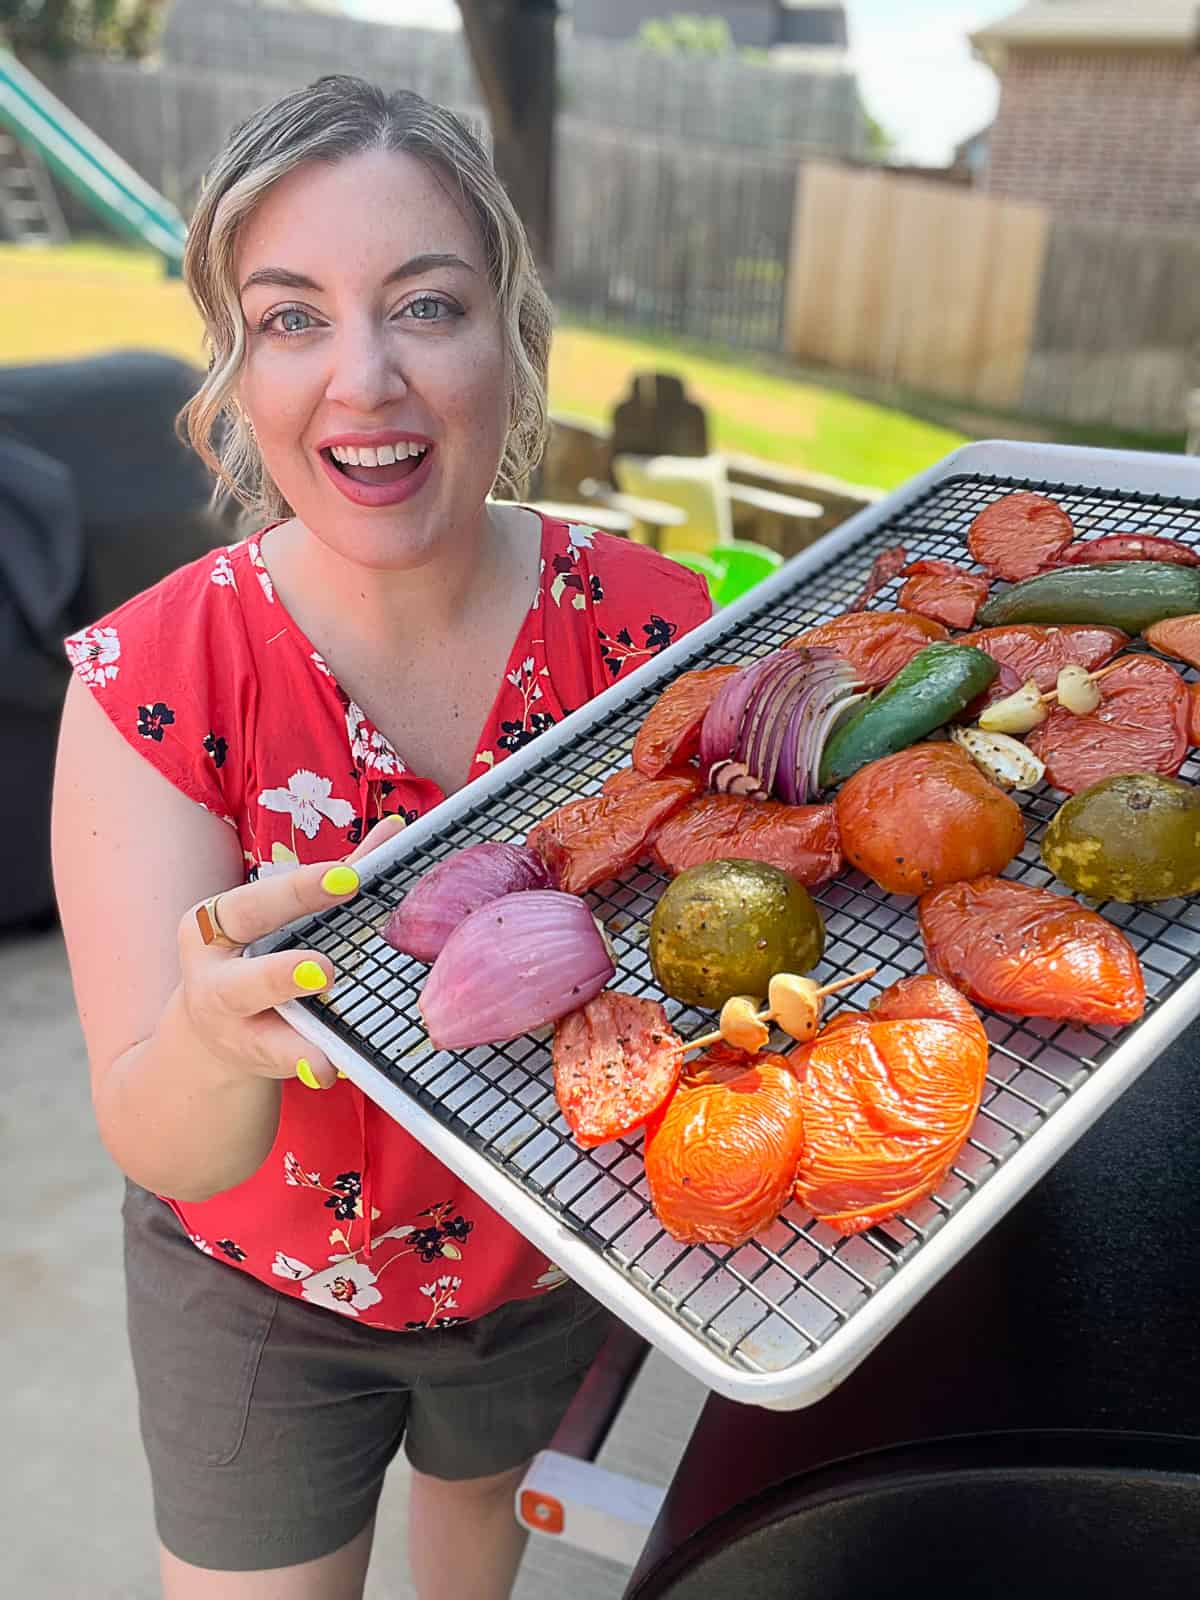 Traeger smoked salsa recipe Appetizer For A Crowd with Jenna Passaro Food Blogger from Sip Bite Go